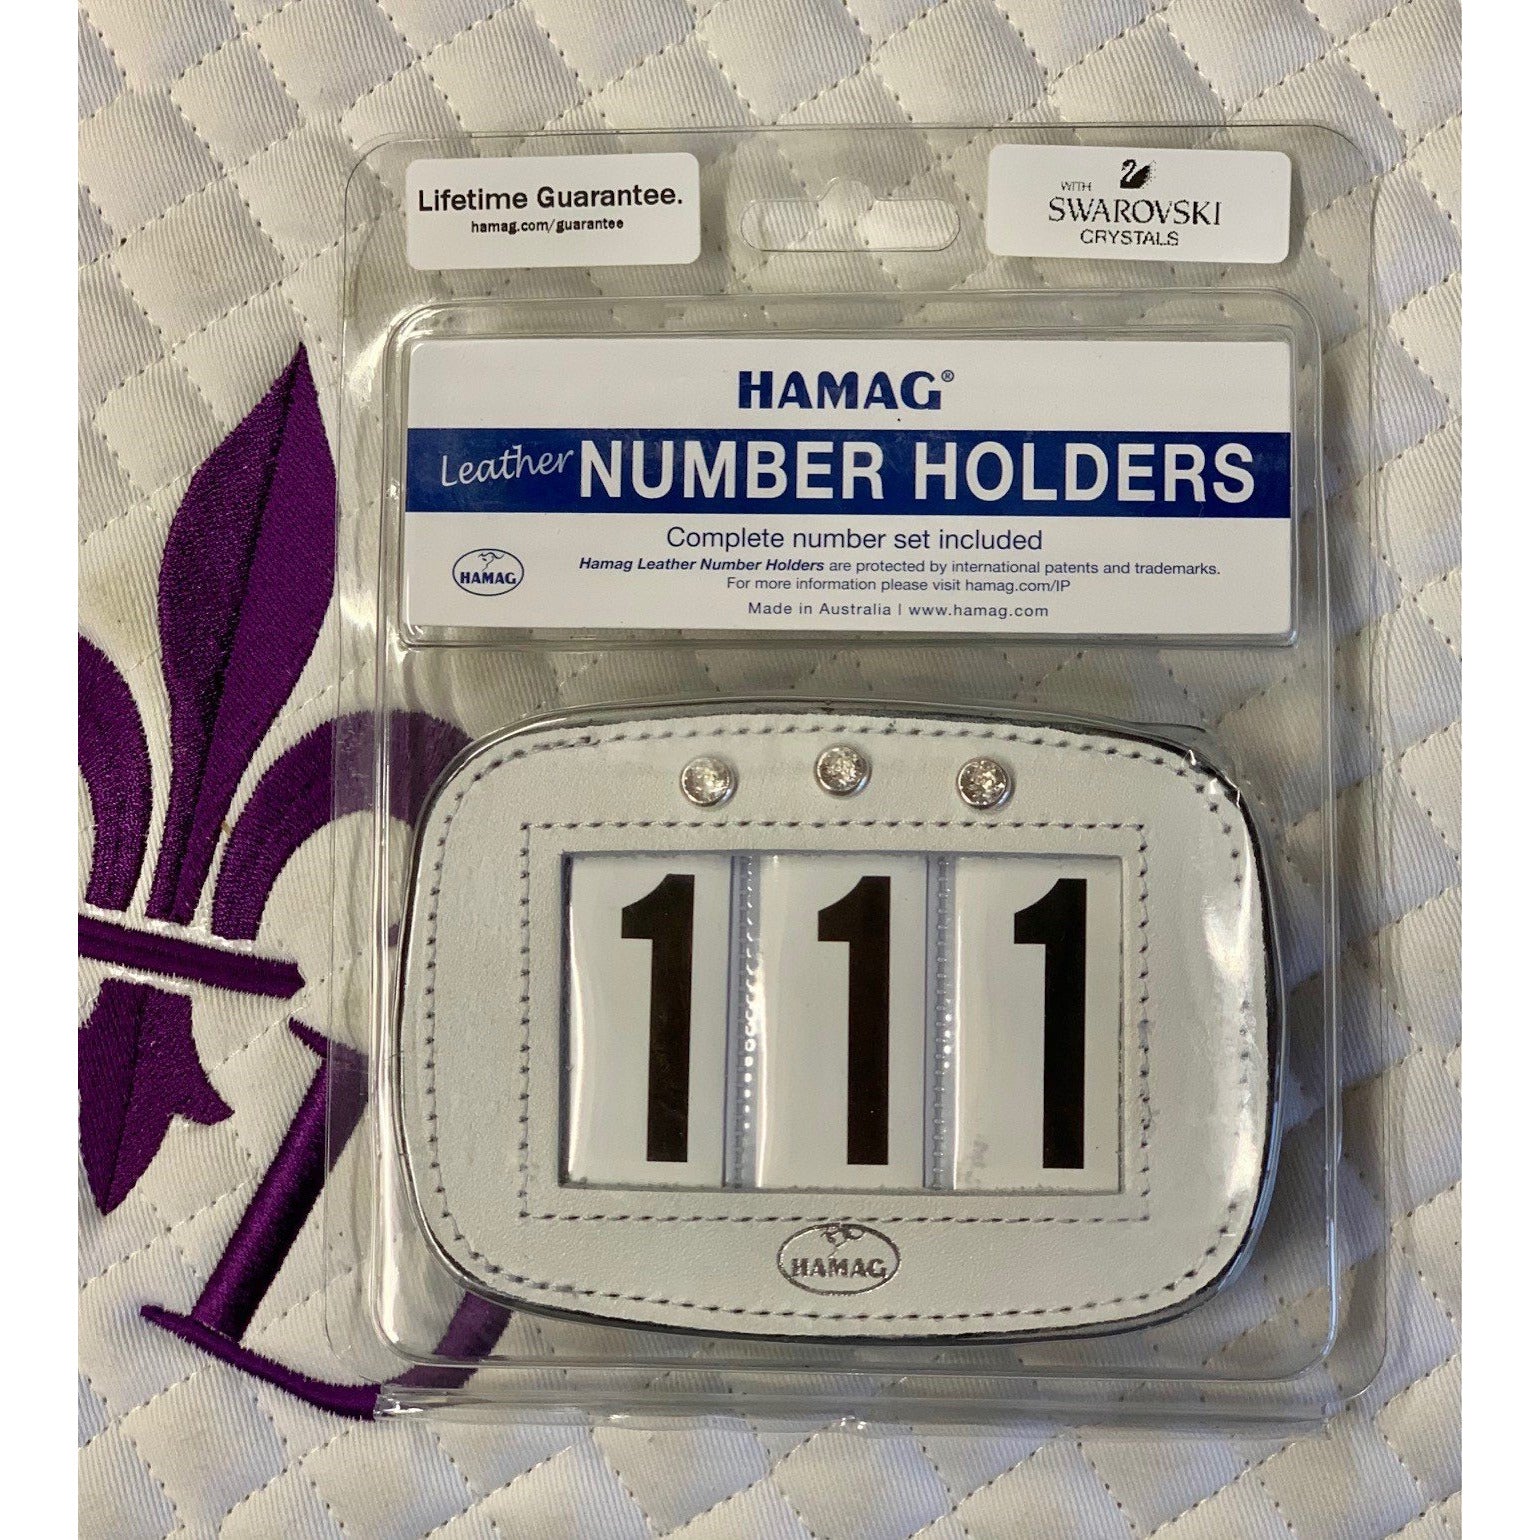 Hamag Saddle Pad Number Holder with Crystals - a pair